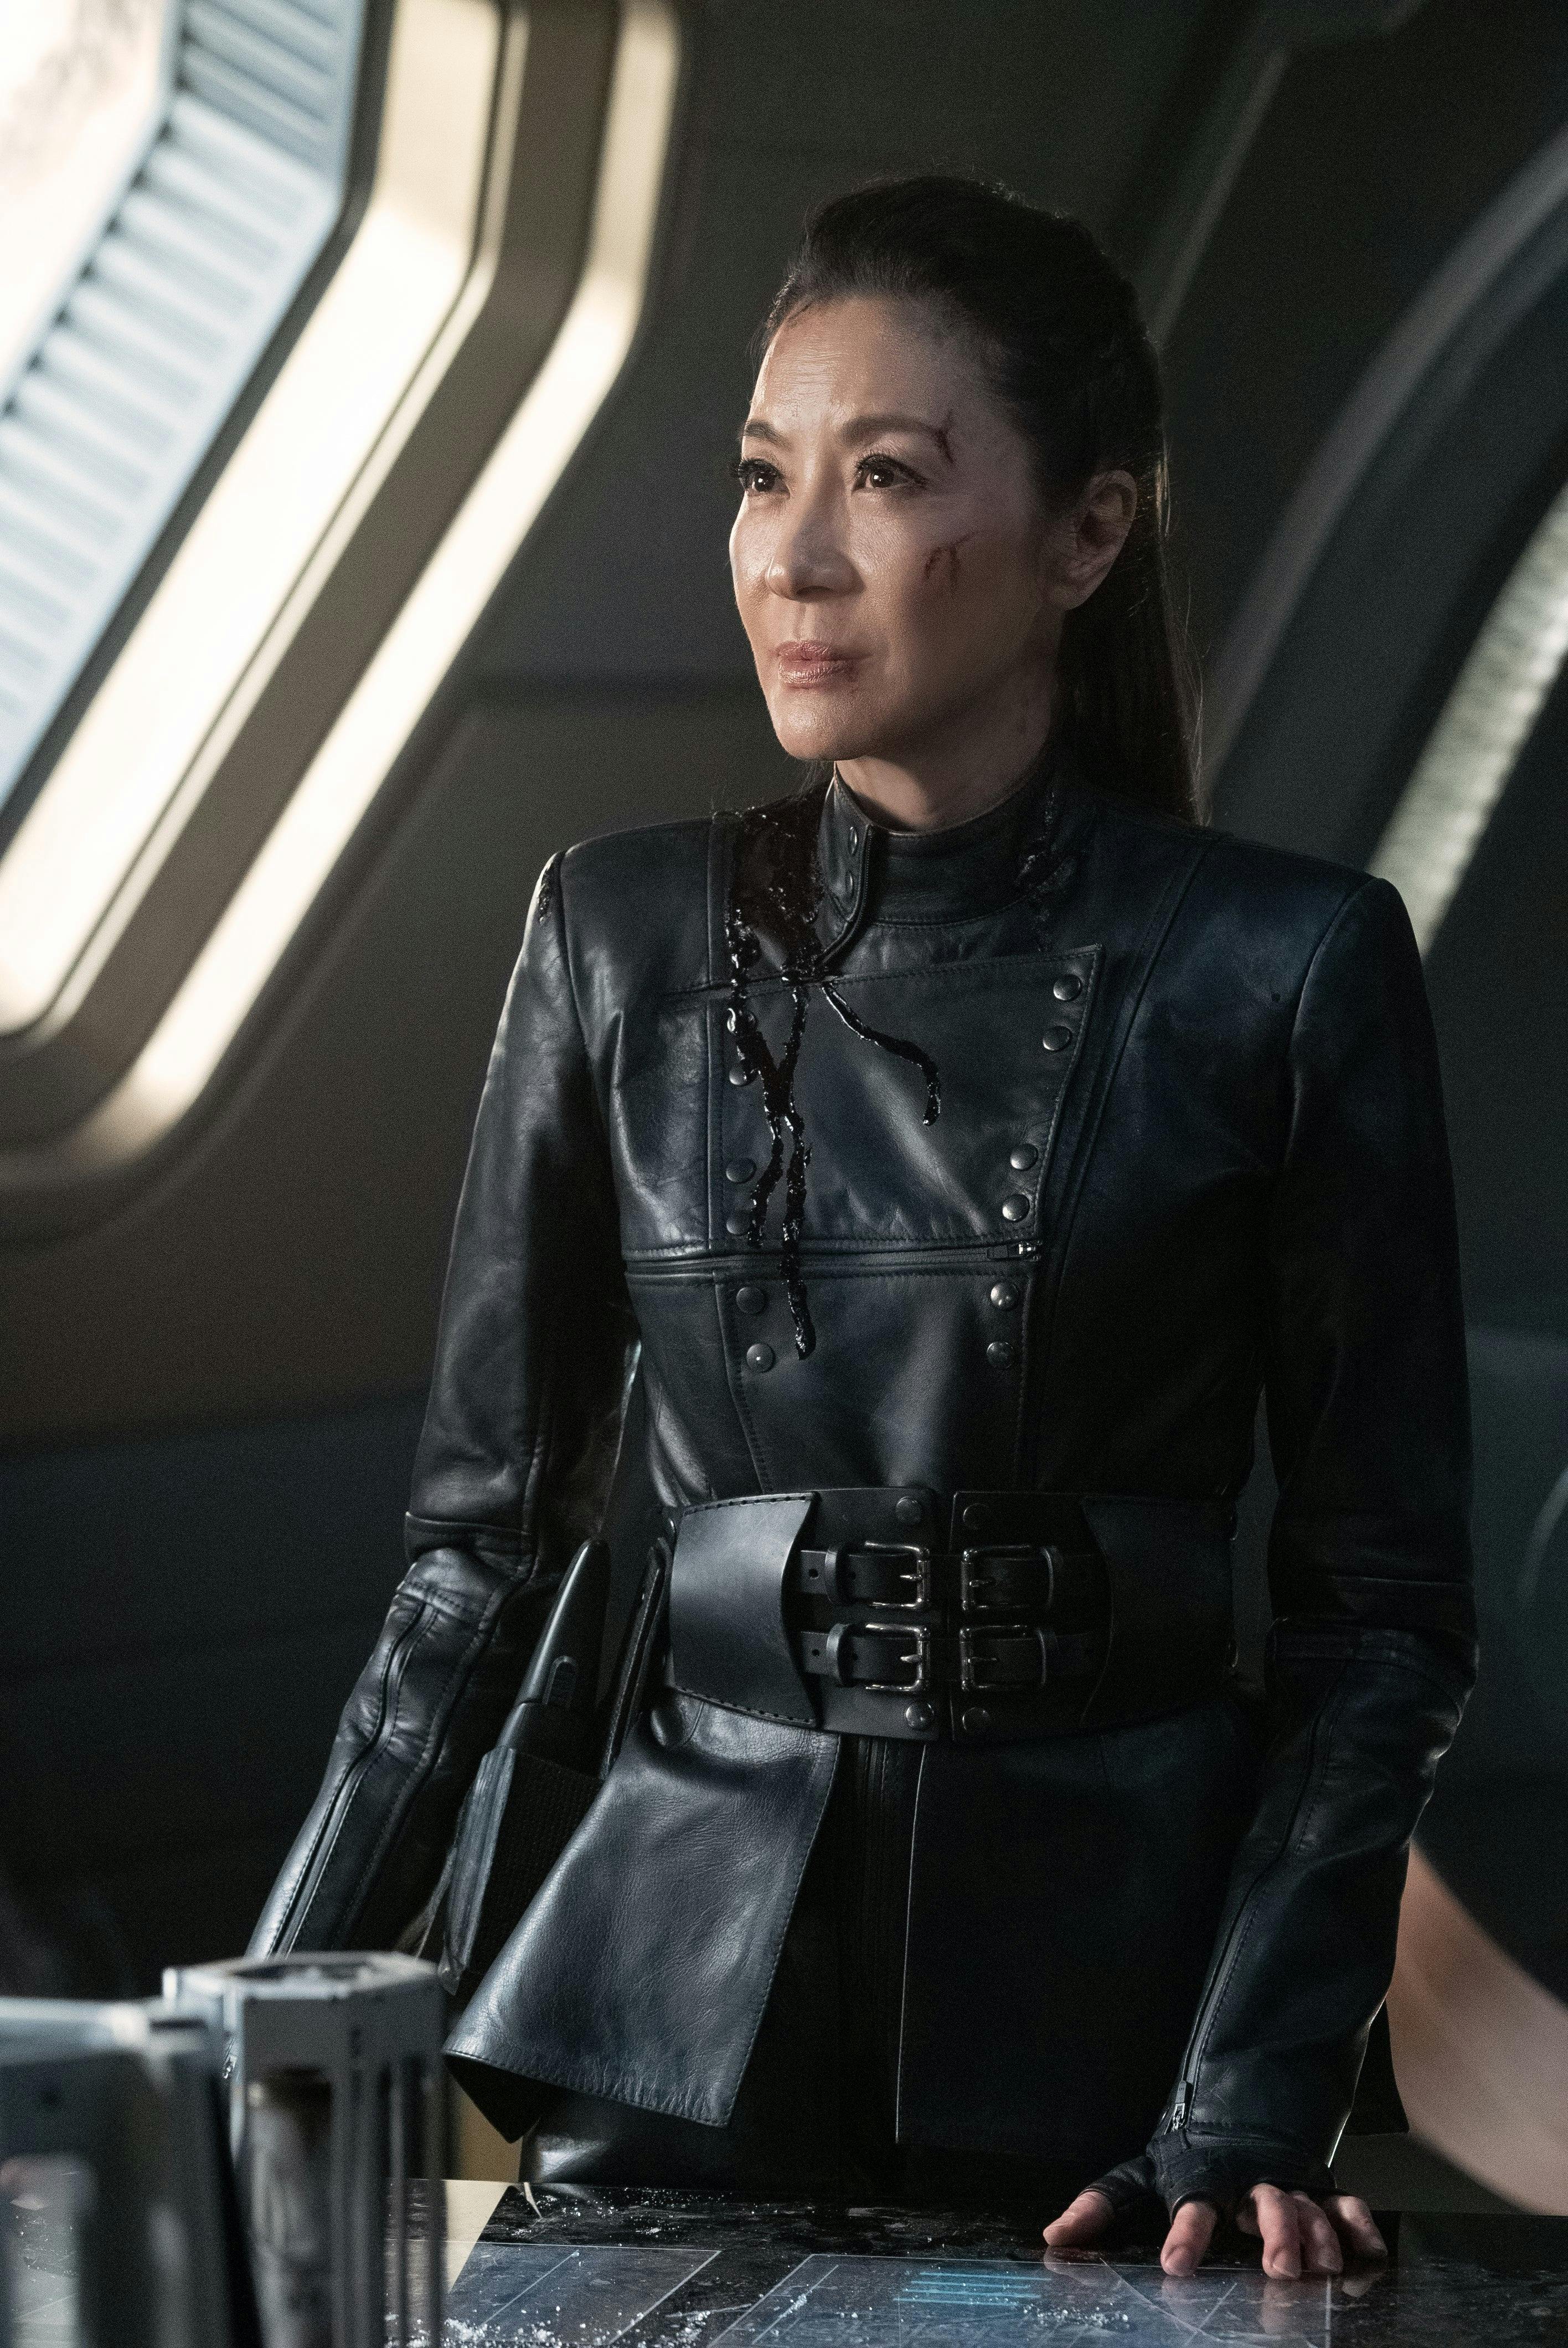 Star Trek: Discovery - "Far From Home"